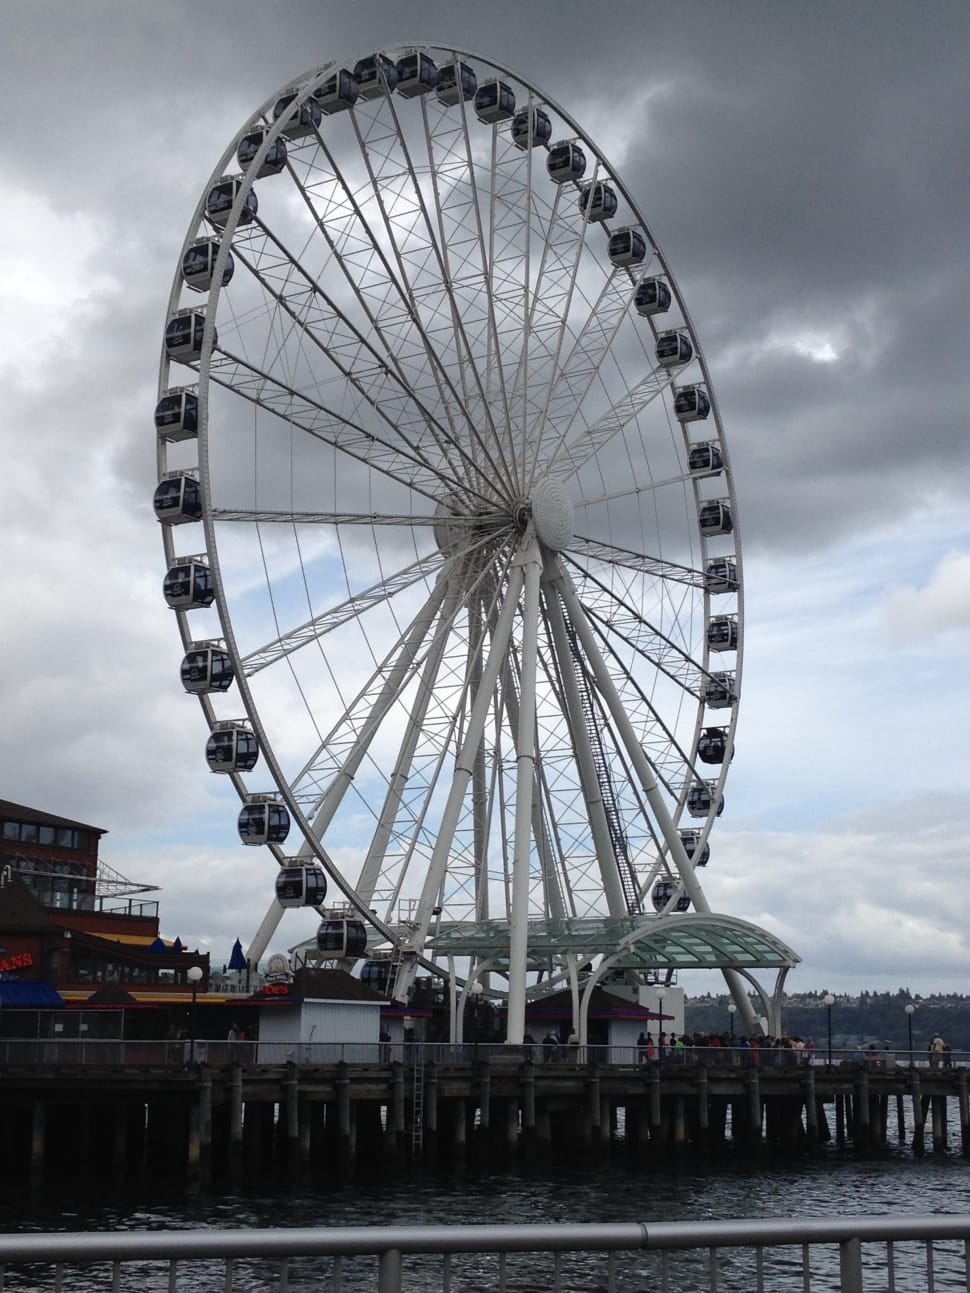 white ferris wheel near body of water under grey clouds during daytime preview